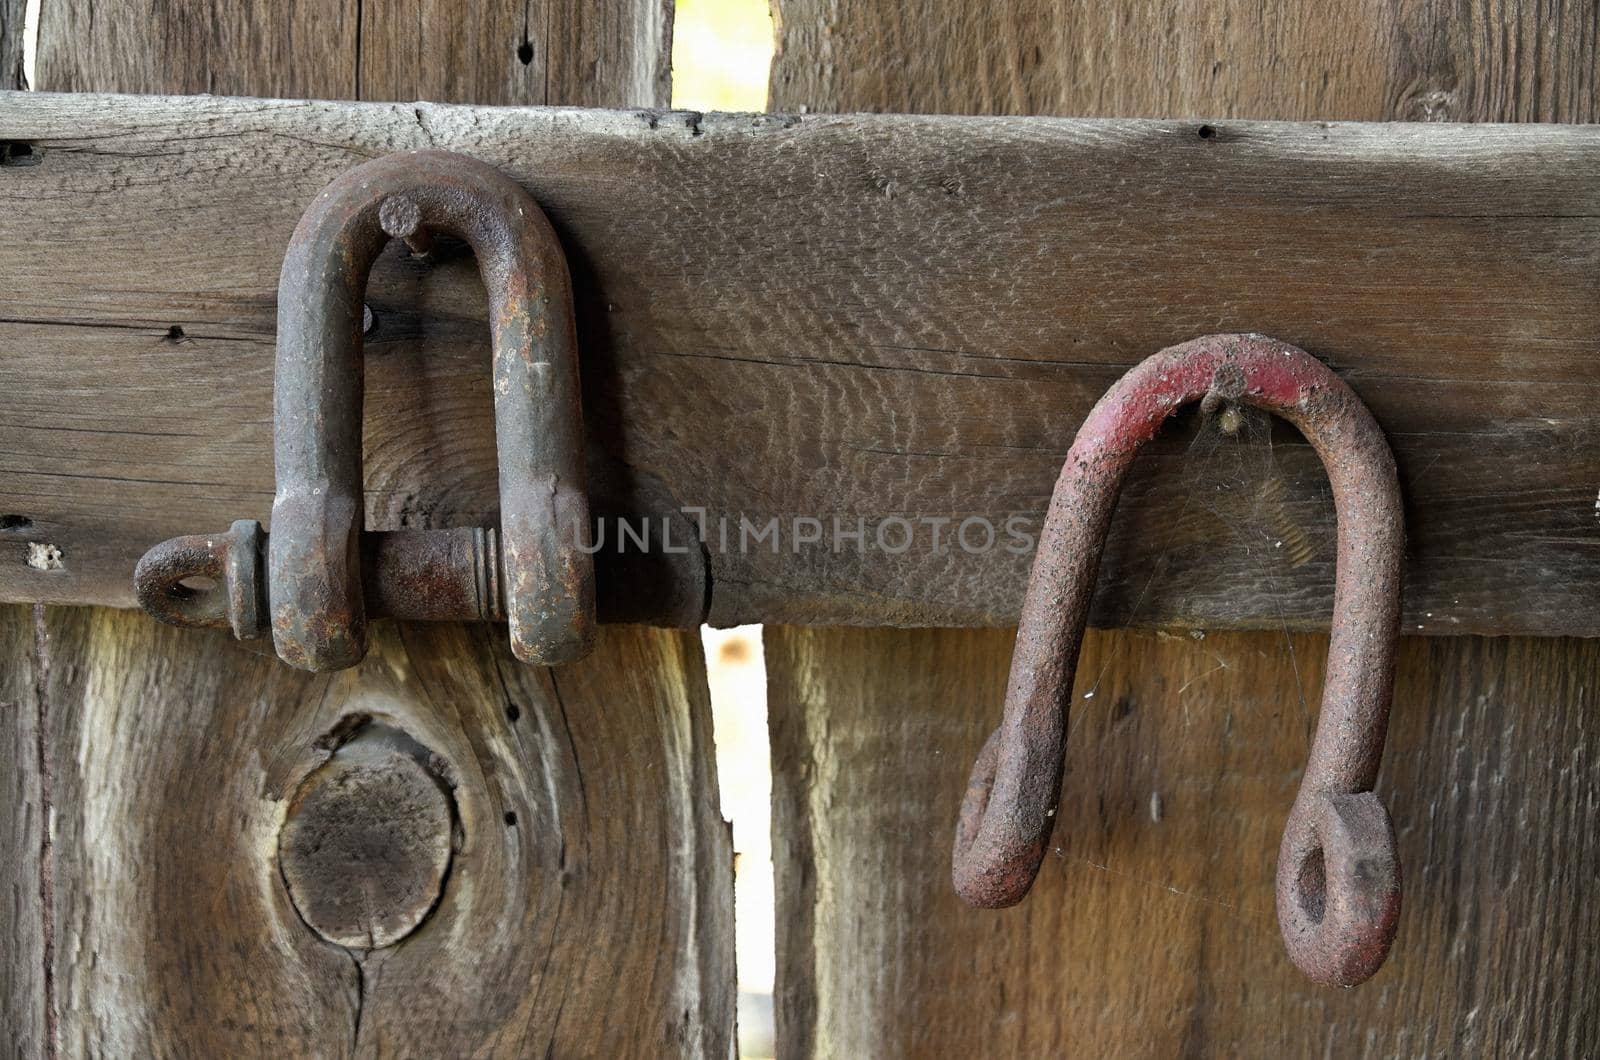 Vintage rusty U bolts hanging on nails in a barn. High quality photo